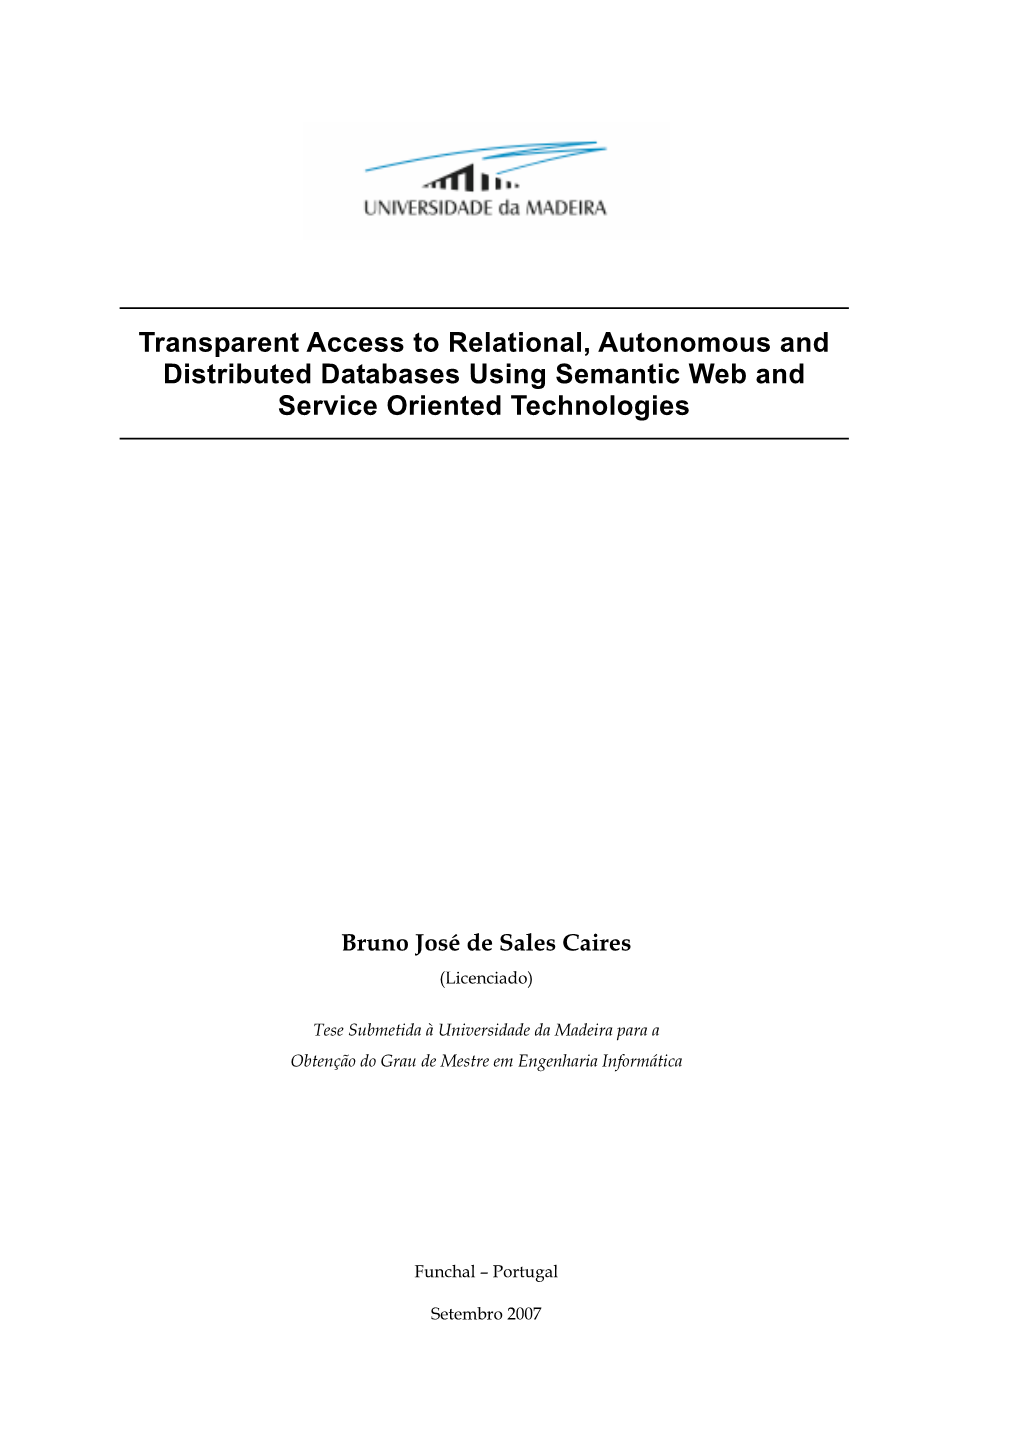 Transparent Access to Relational, Autonomous and Distributed Databases Using Semantic Web and Service Oriented Technologies